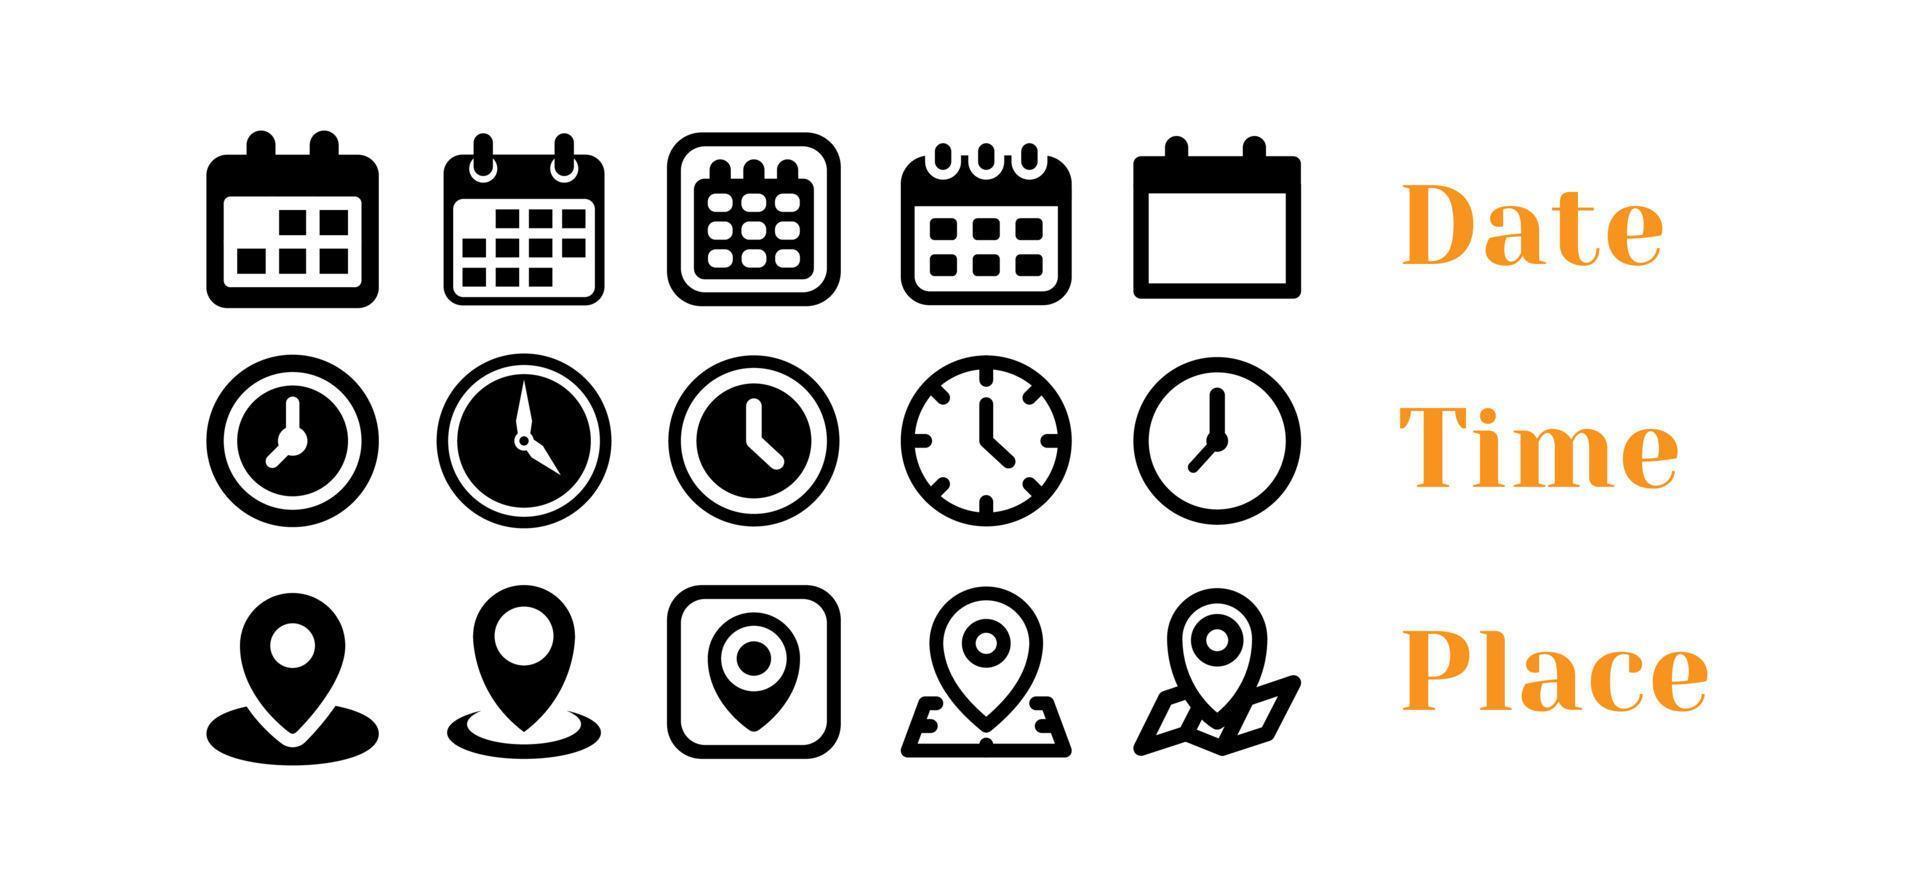 Date, Time, Address or Place Icons Symbol set 30 Desember 2022 vector